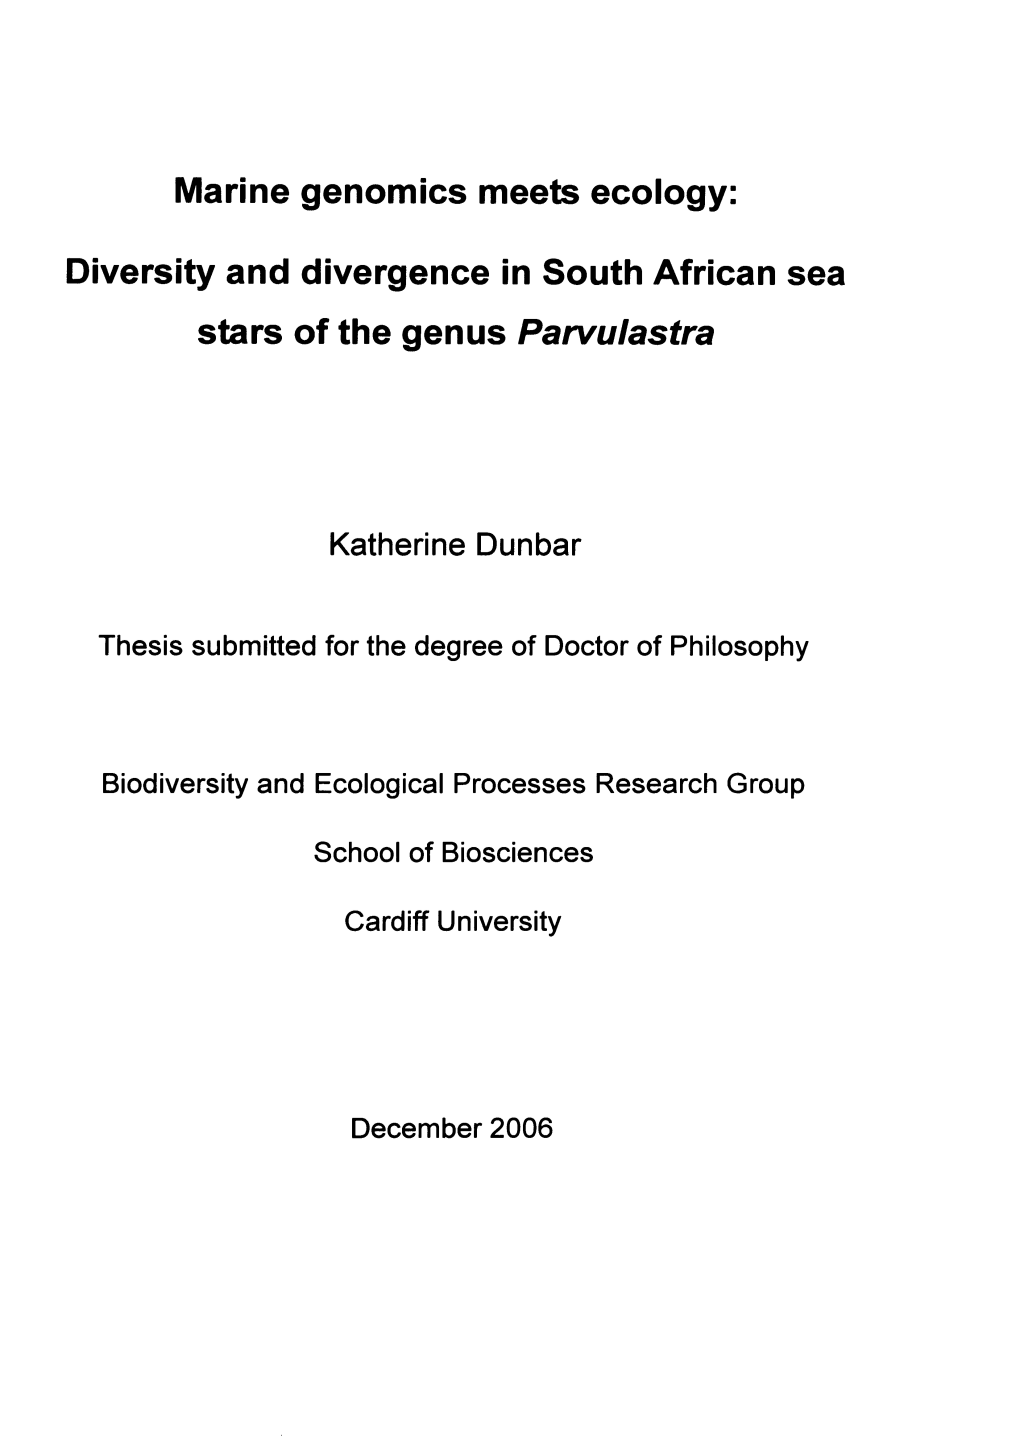 Marine Genomics Meets Ecology: Diversity and Divergence in South